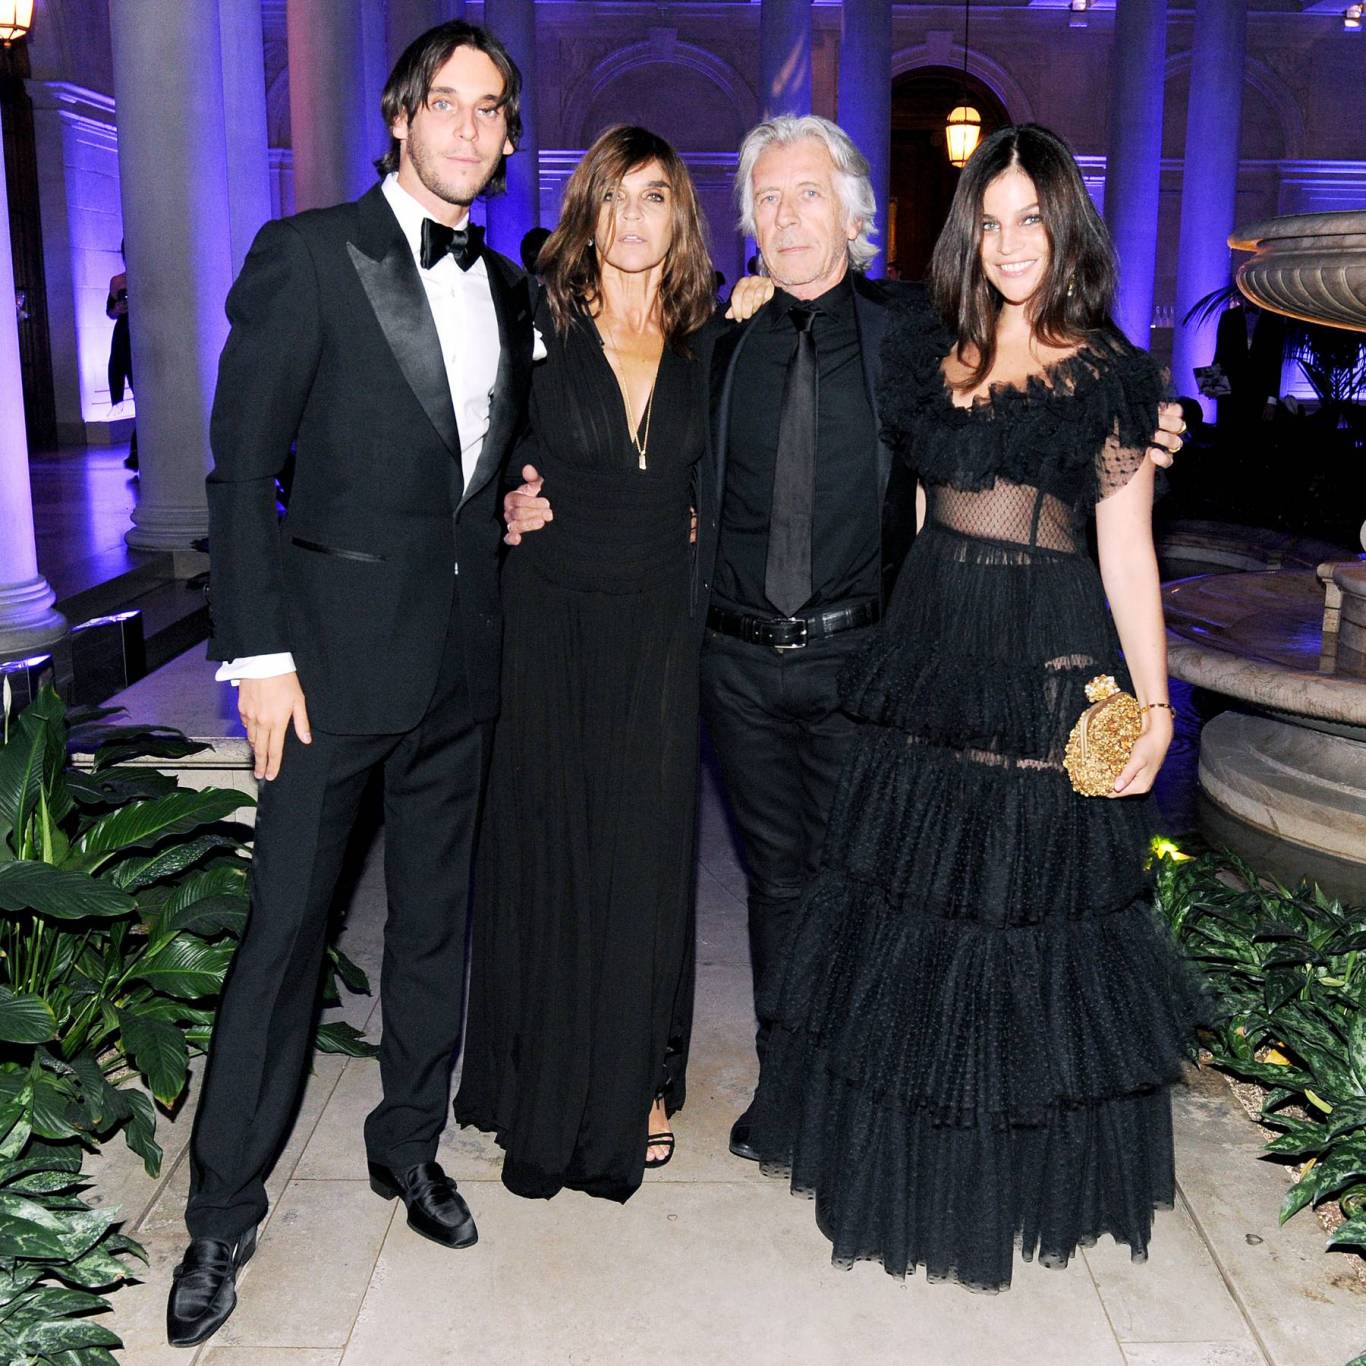 CARINE ROITFELD and Friends Toast the Launch of CR FASHION BOOK at The Frick Collection, Presented by Mercedes-Benz